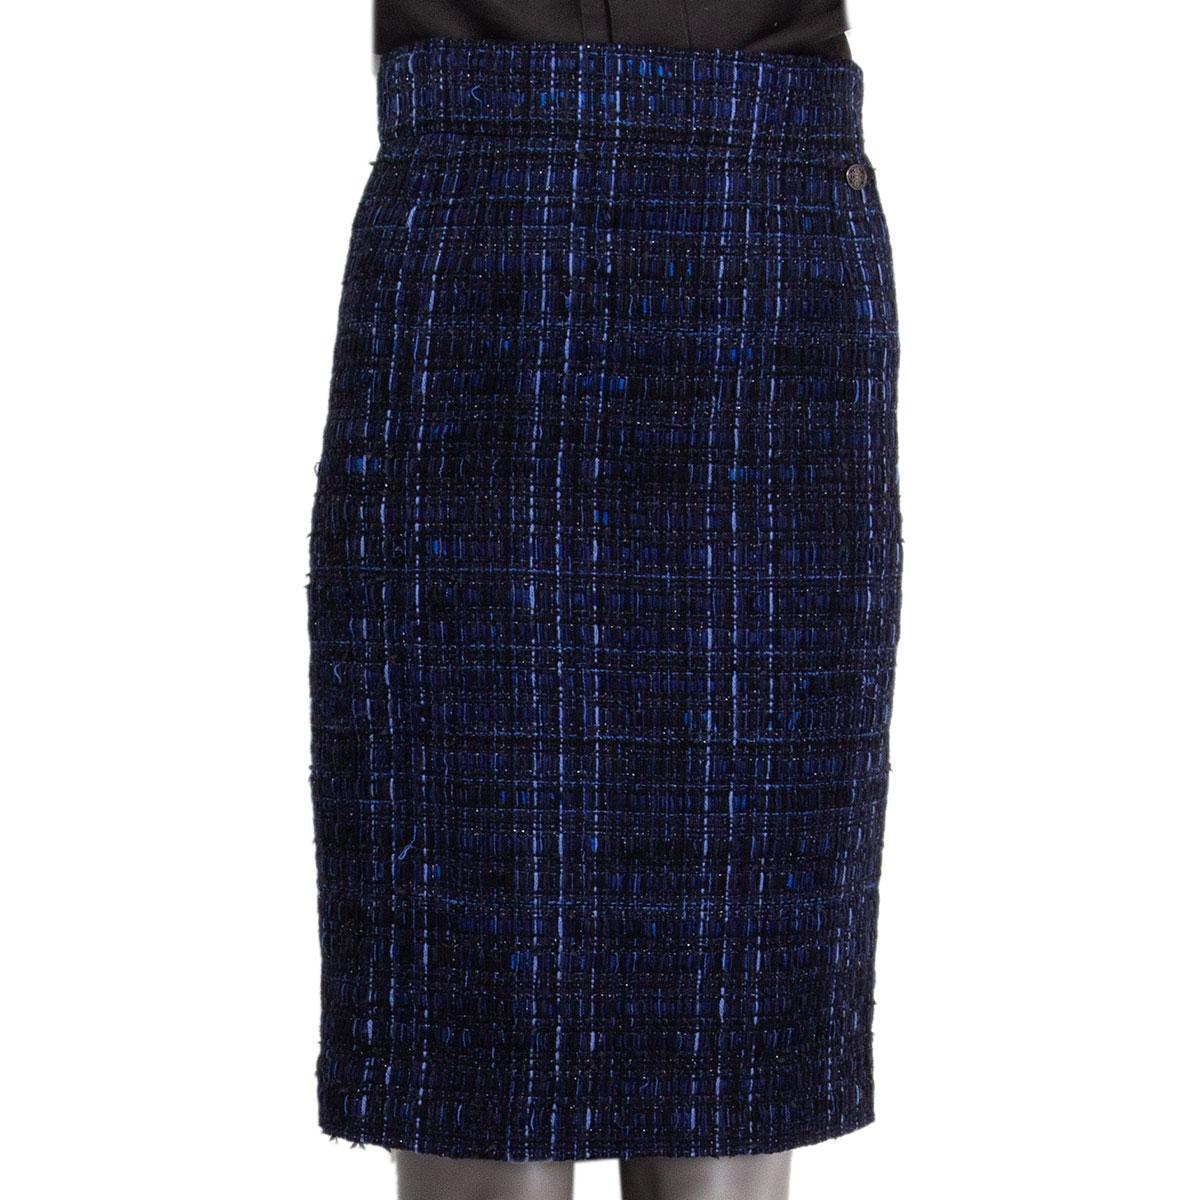 100% authentic Chanel boucle pencil skirt in midnightblue, blue and black cotton (40%), silk (25%), nylon (15%), wool (10%), linen (10%). Closes with three hooks and a concealed zipper on the back and with two patch pockets. Lined in black silk